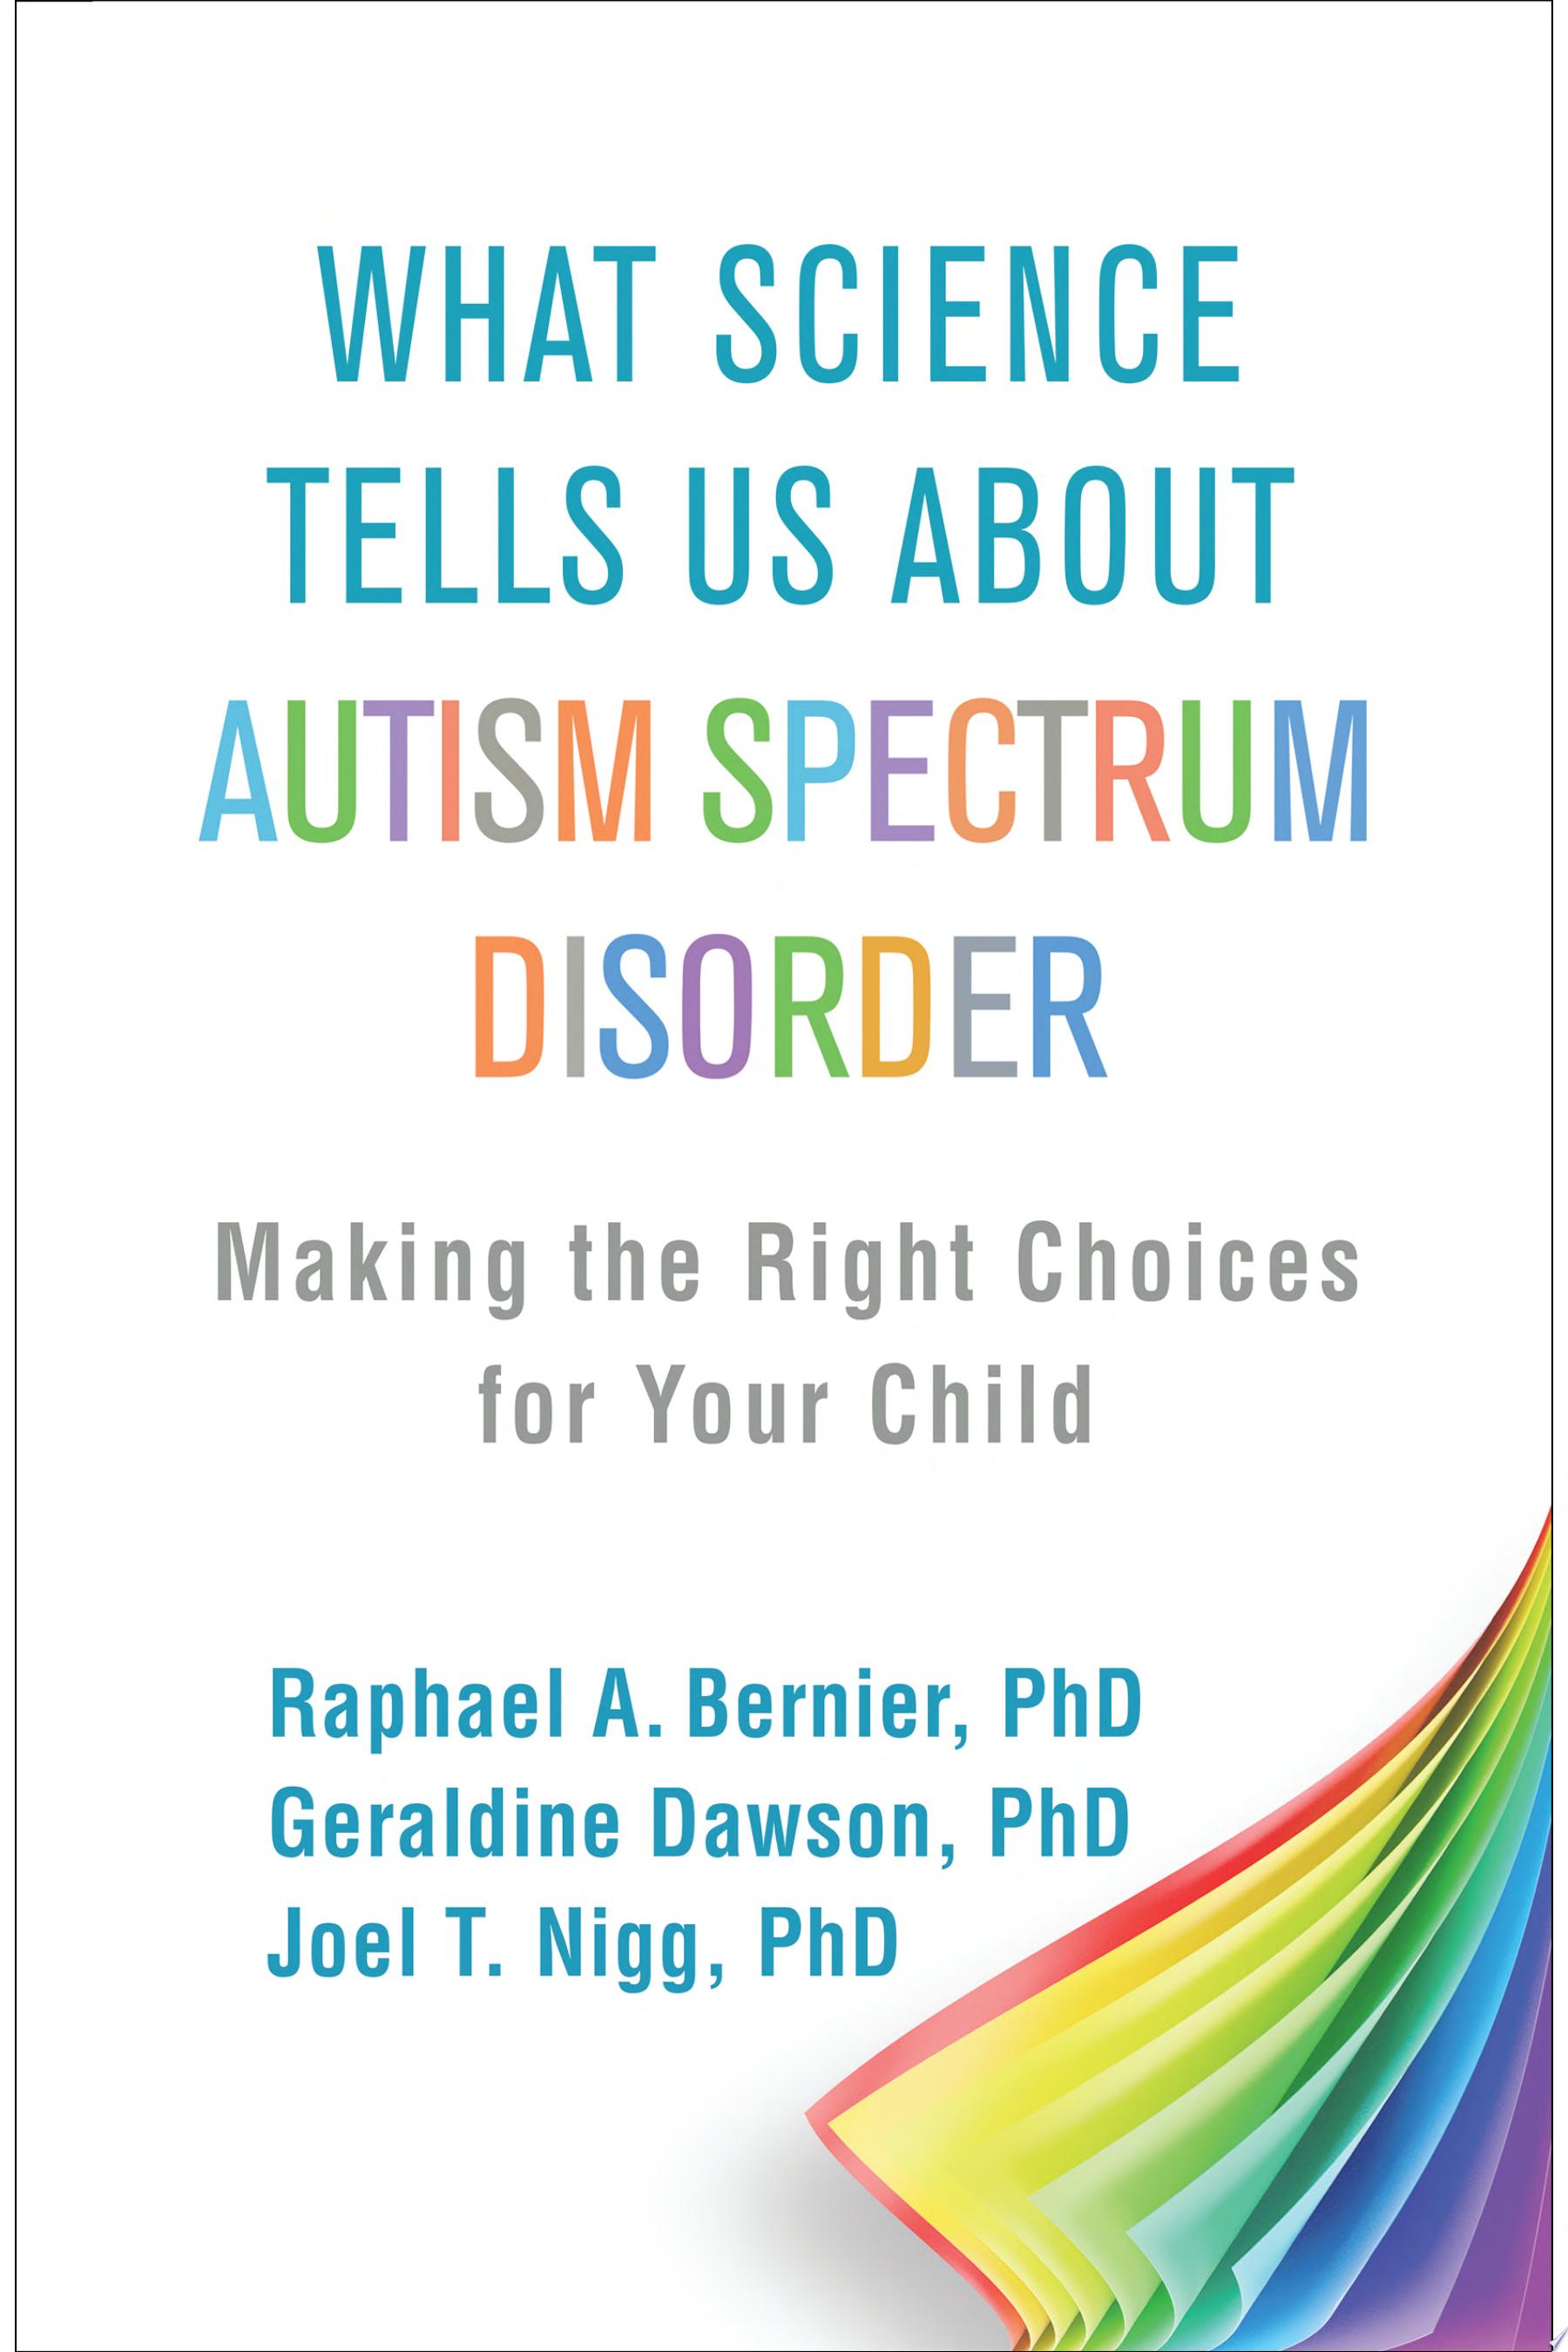 Image for "What Science Tells Us about Autism Spectrum Disorder"